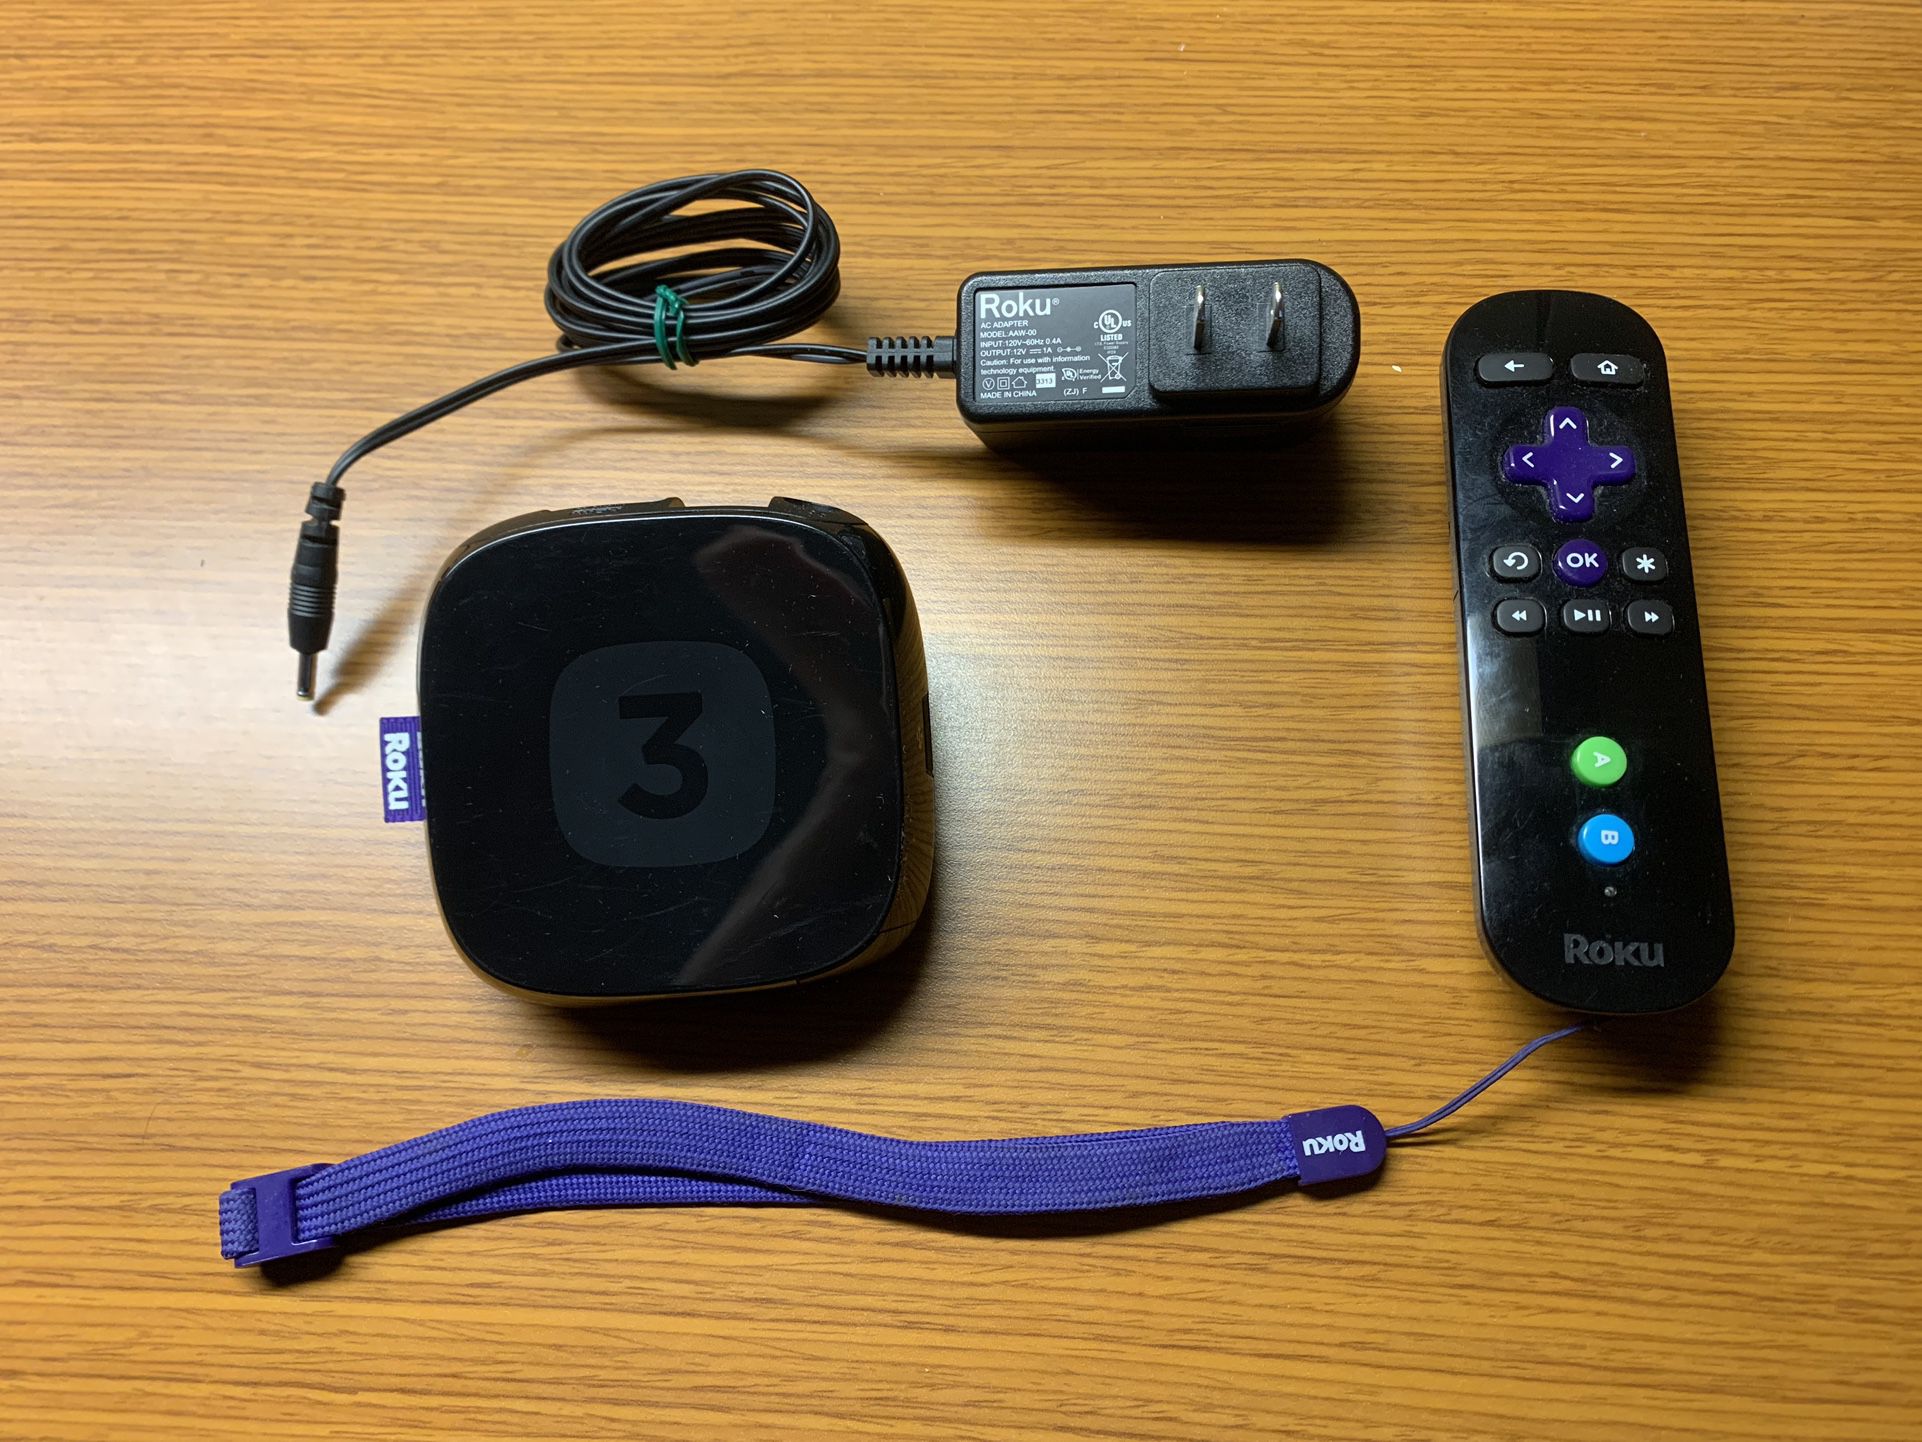 Roku 3 Streaming Media Player With Voice Search (Remote Included)